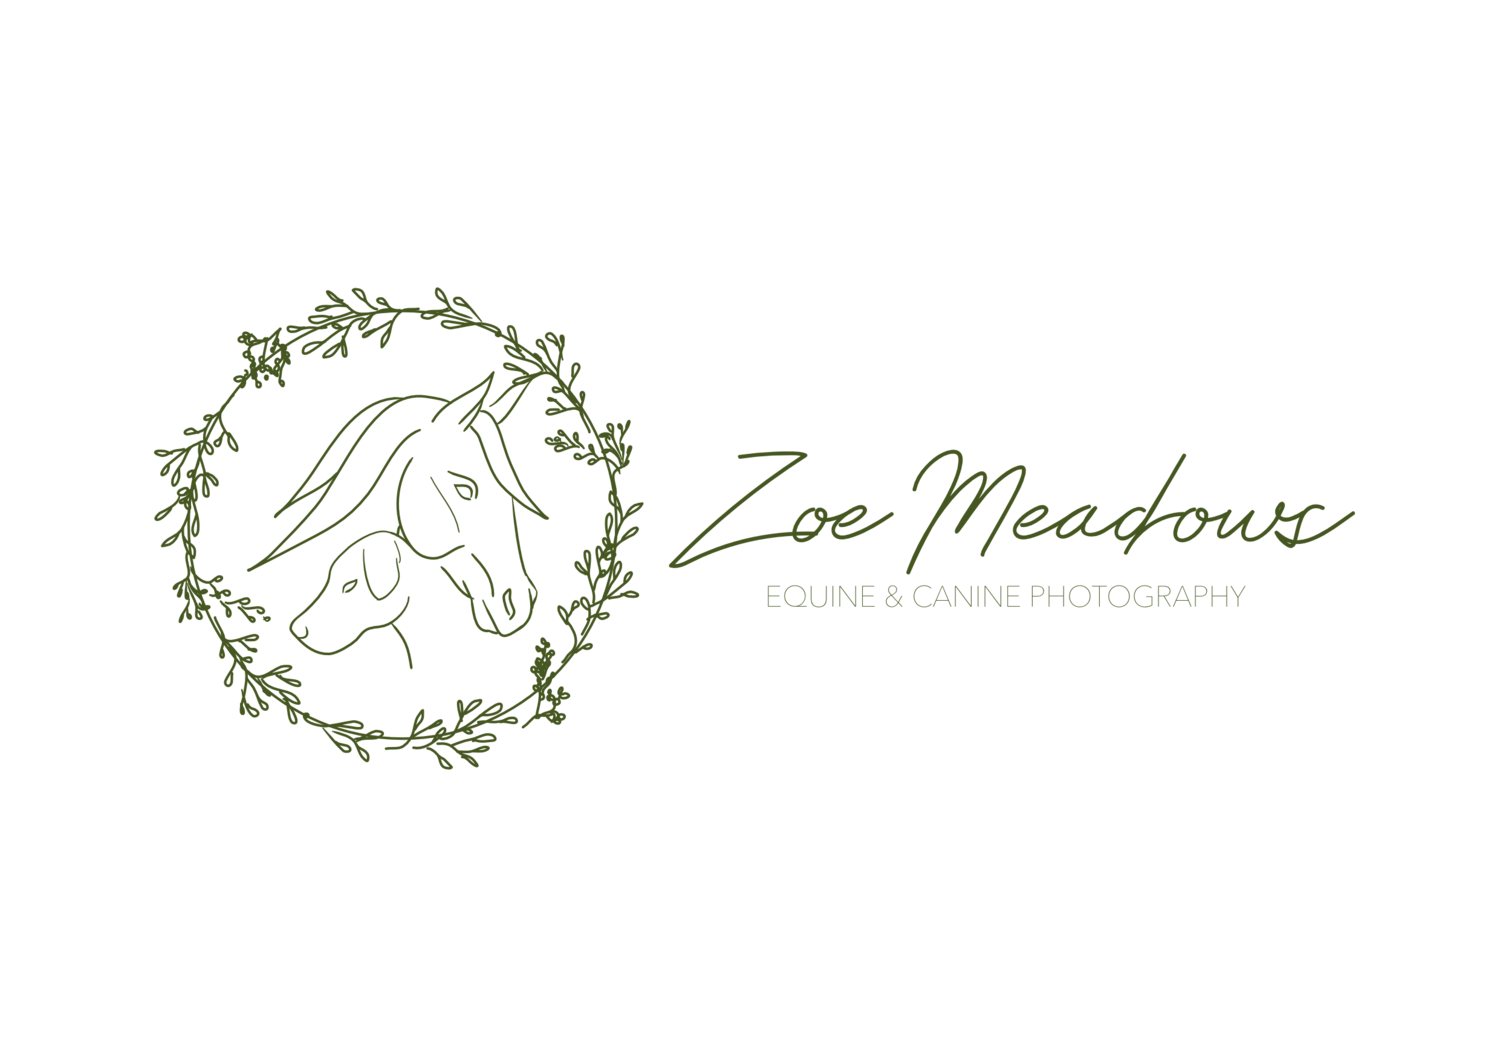 Zoe Meadows Fine Art Equine and Canine Photography 